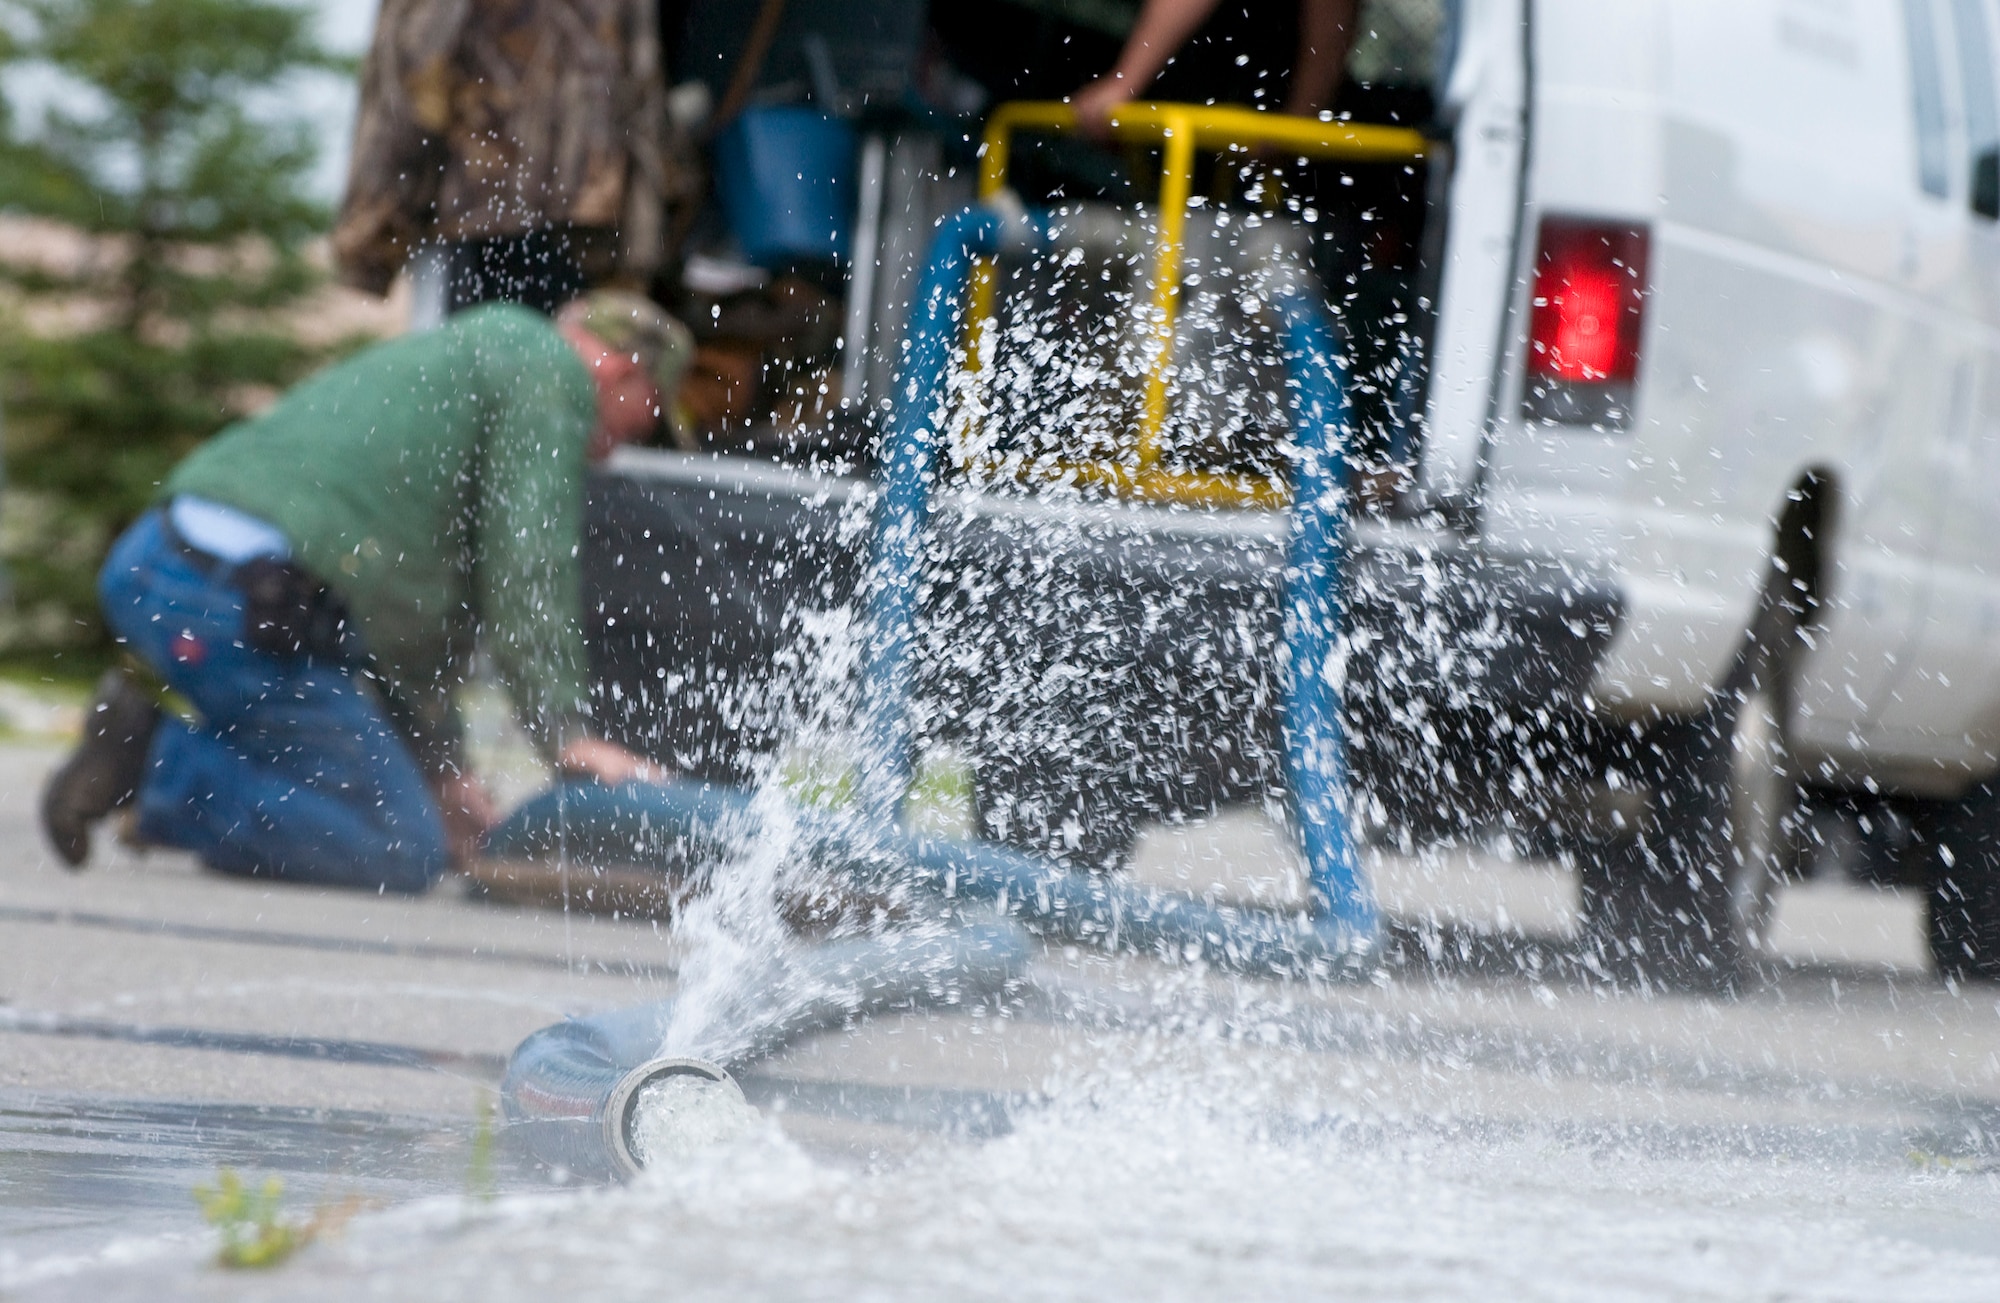 Denis Murphy a Davis, Gonzalez, and Rodriguez maintenance employee pumps water out of a flooded utilidor Aug. 7, 2008, at Eielson Air Force Base, Alaska. Eielson received more rainfall in the past couple weeks than it receives all year. With this much rain fall in a short amount of time the local area is experiencing mass flooding; there are currently more than 65 homes that have up to six inches of water in their basements. The DGR housing maintenance office is working on restoring all basements that have water damage. (U.S. Air Force photo by Airman 1st Class Jonathan Snyder) (Released)